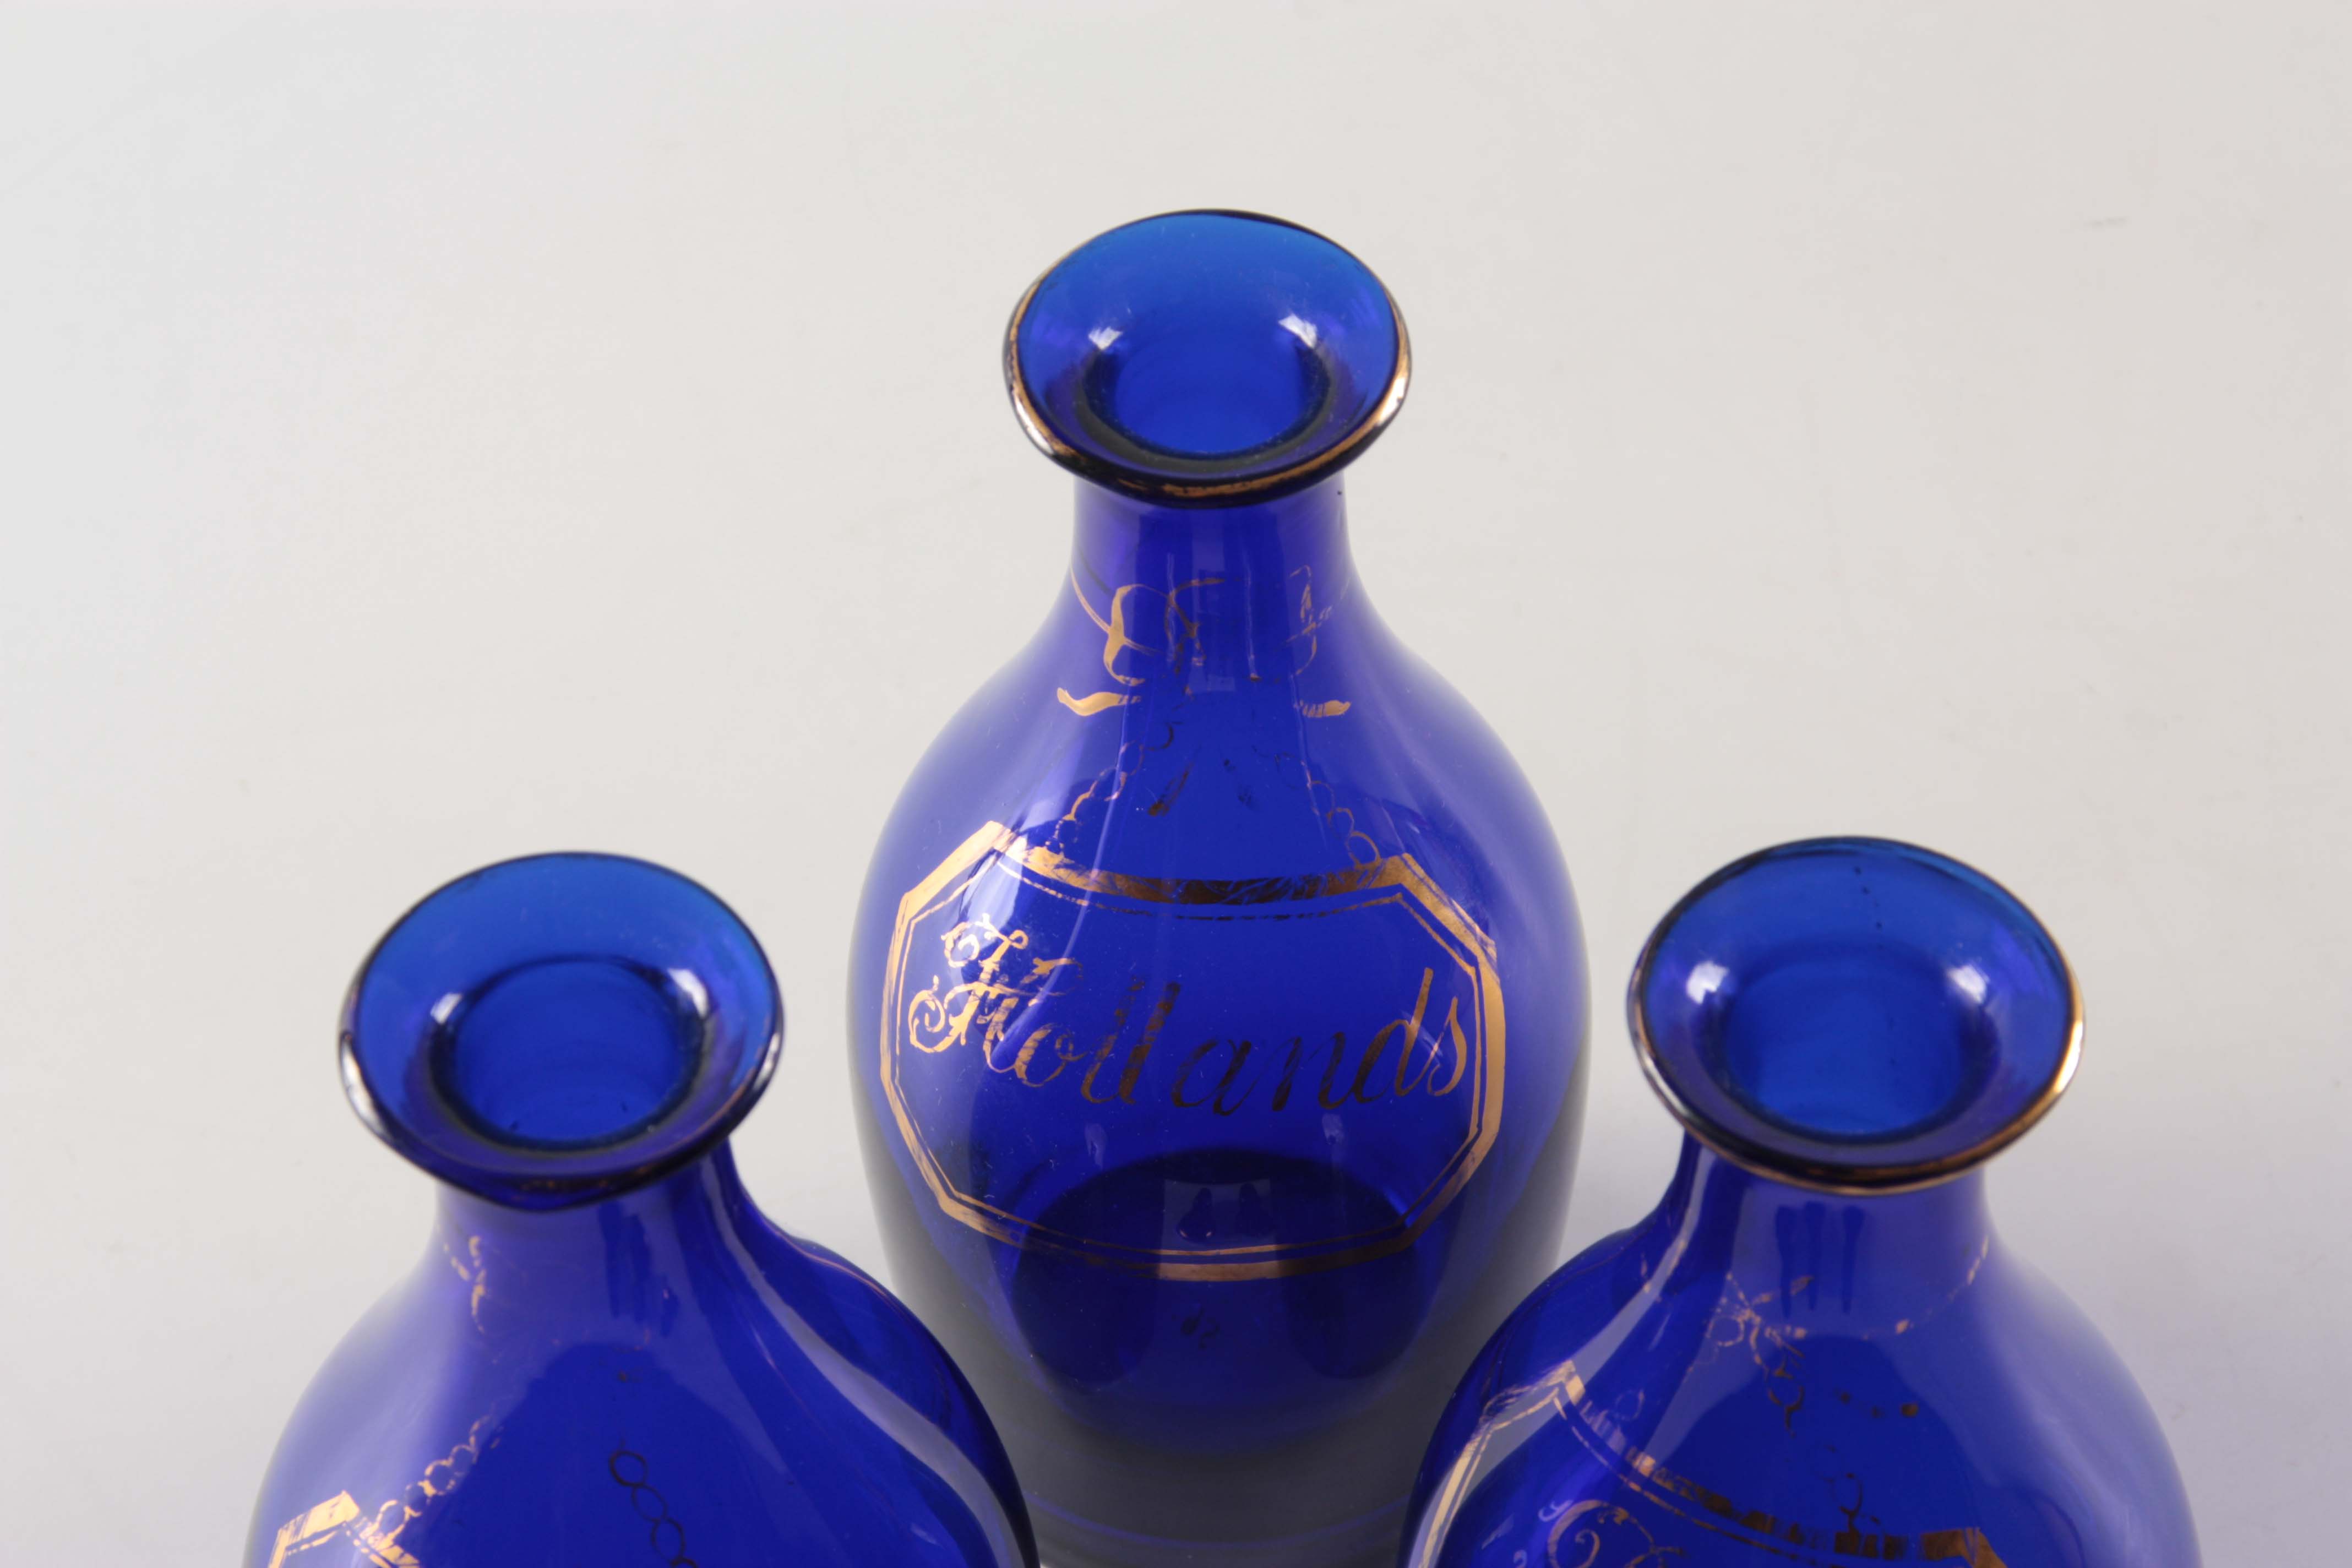 A SET OF THREE EARLY 19TH CENTURY BRISTOL BLUE GLASS DECANTERS for Rum, Brandy and Hollands with - Image 6 of 7